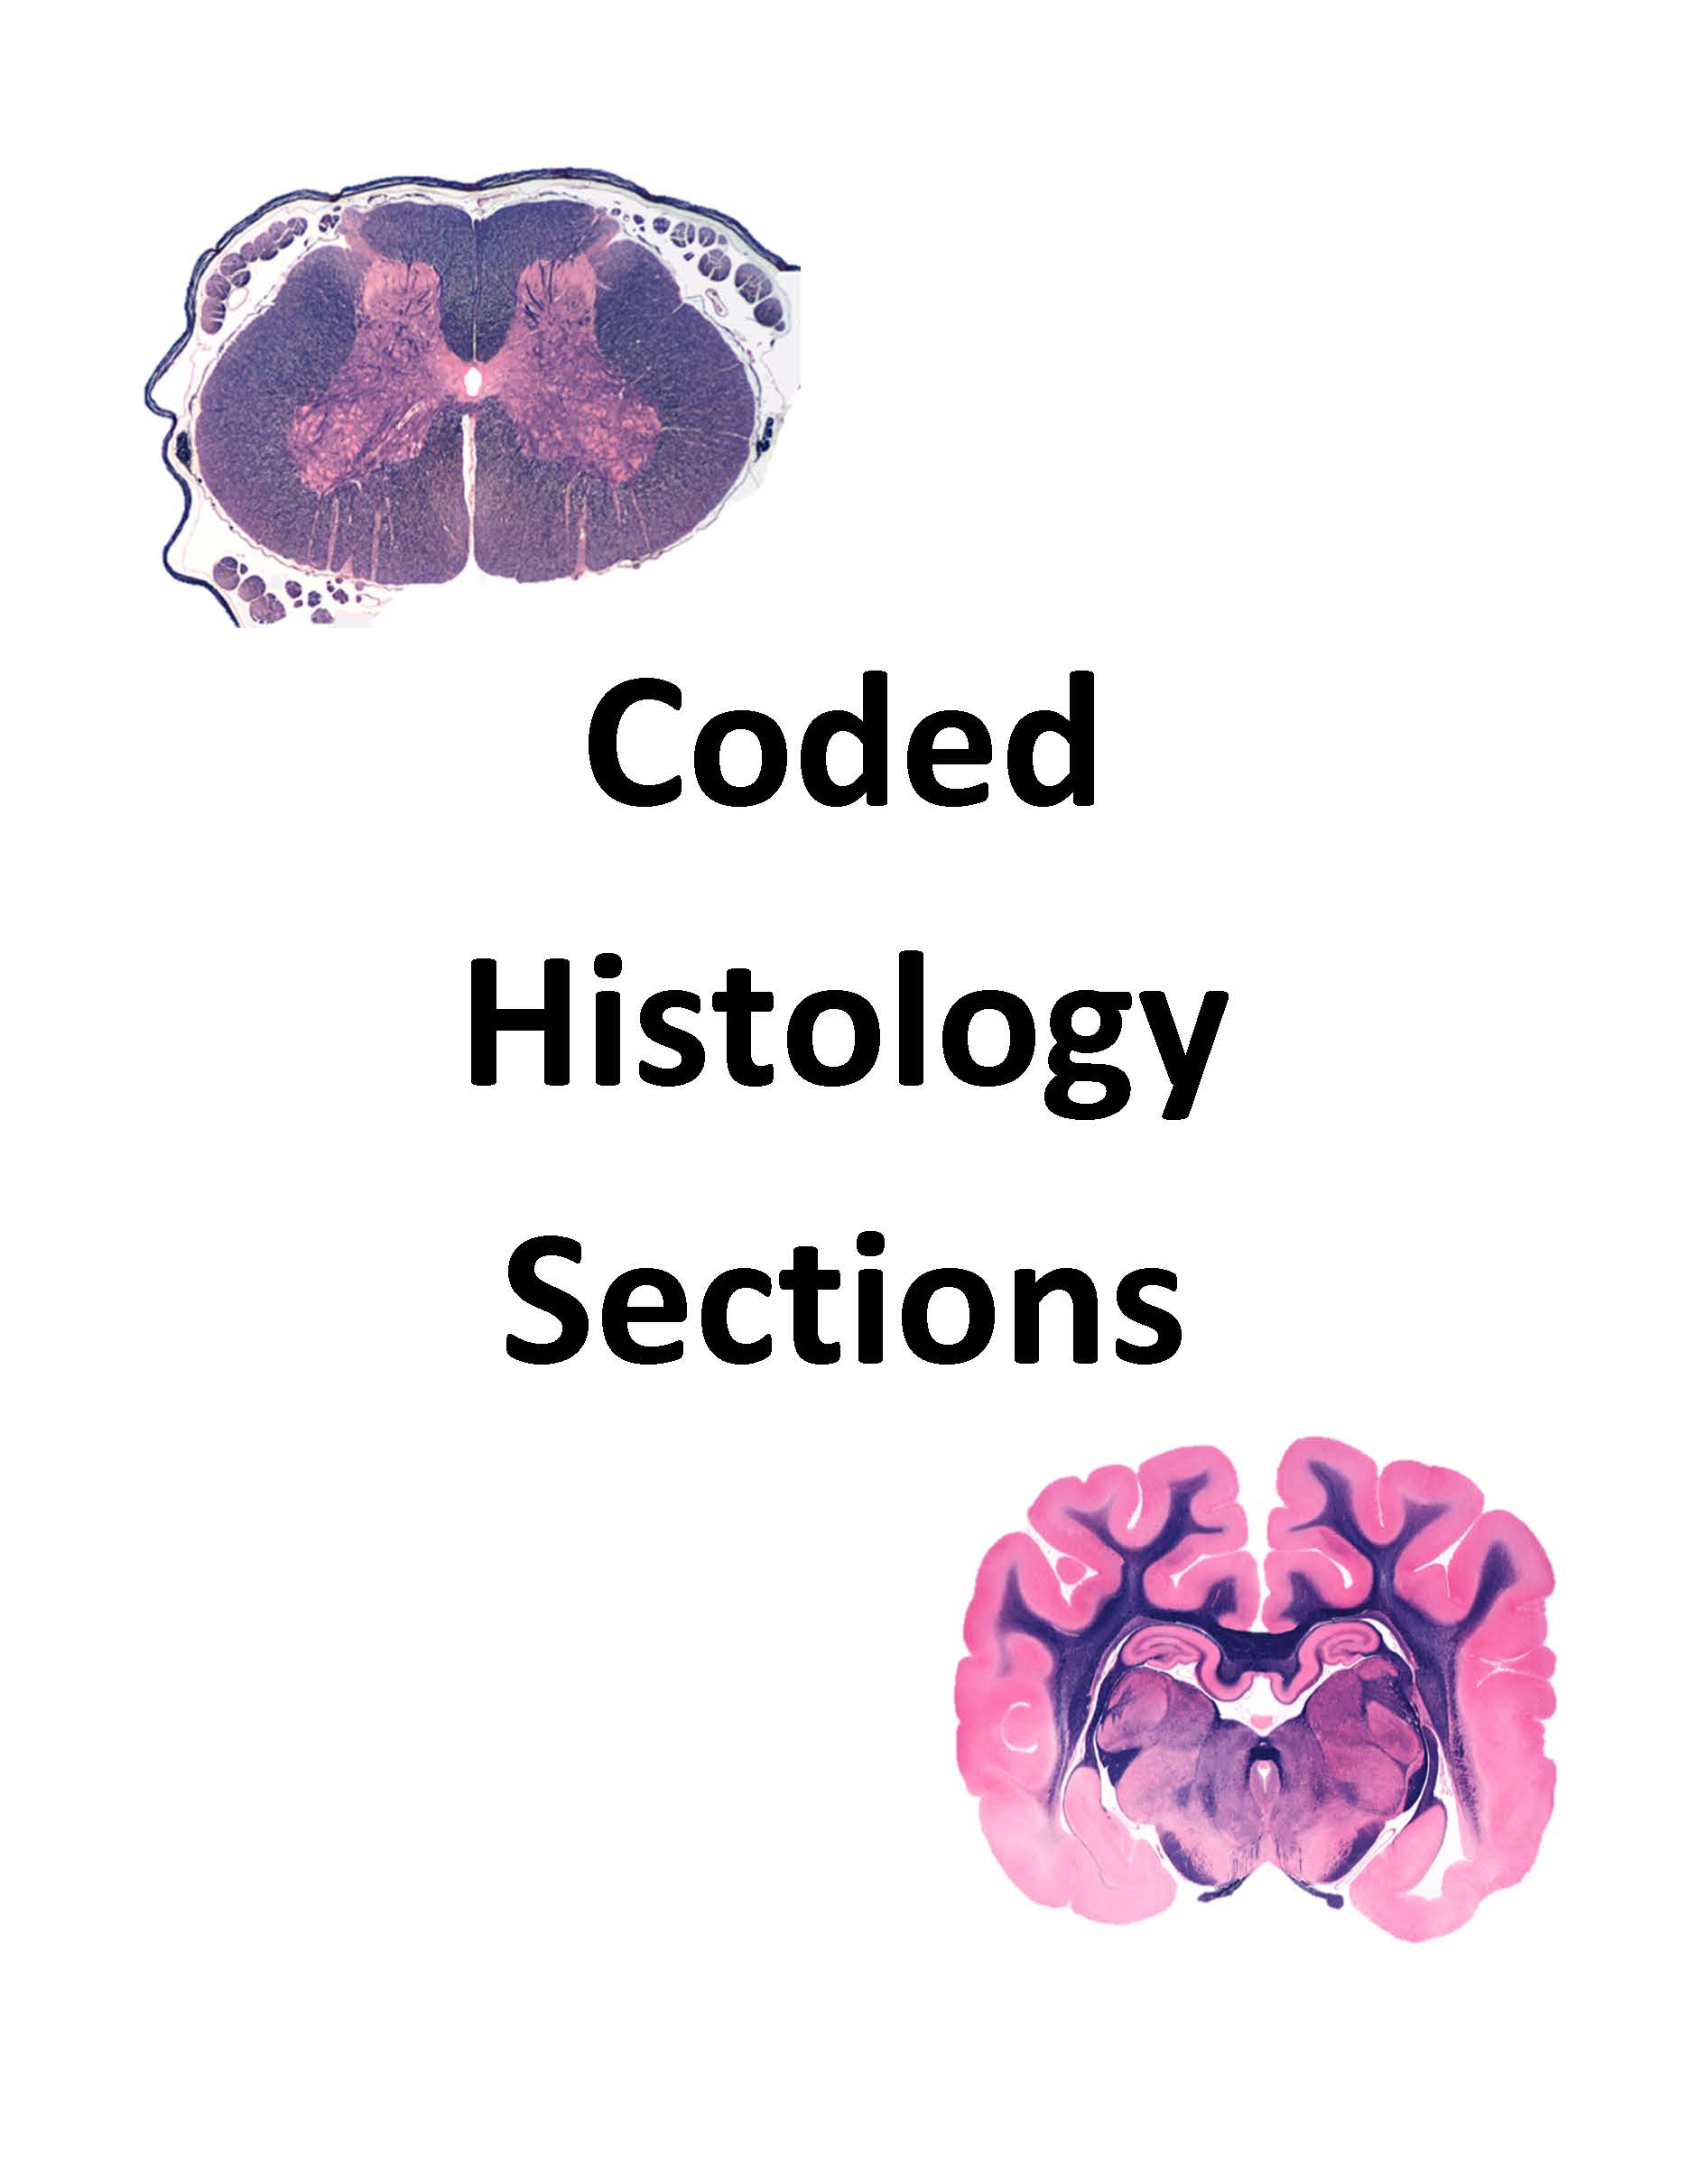 VIBS/NRSC 603 - Coded Histology Sections - Fall 2022